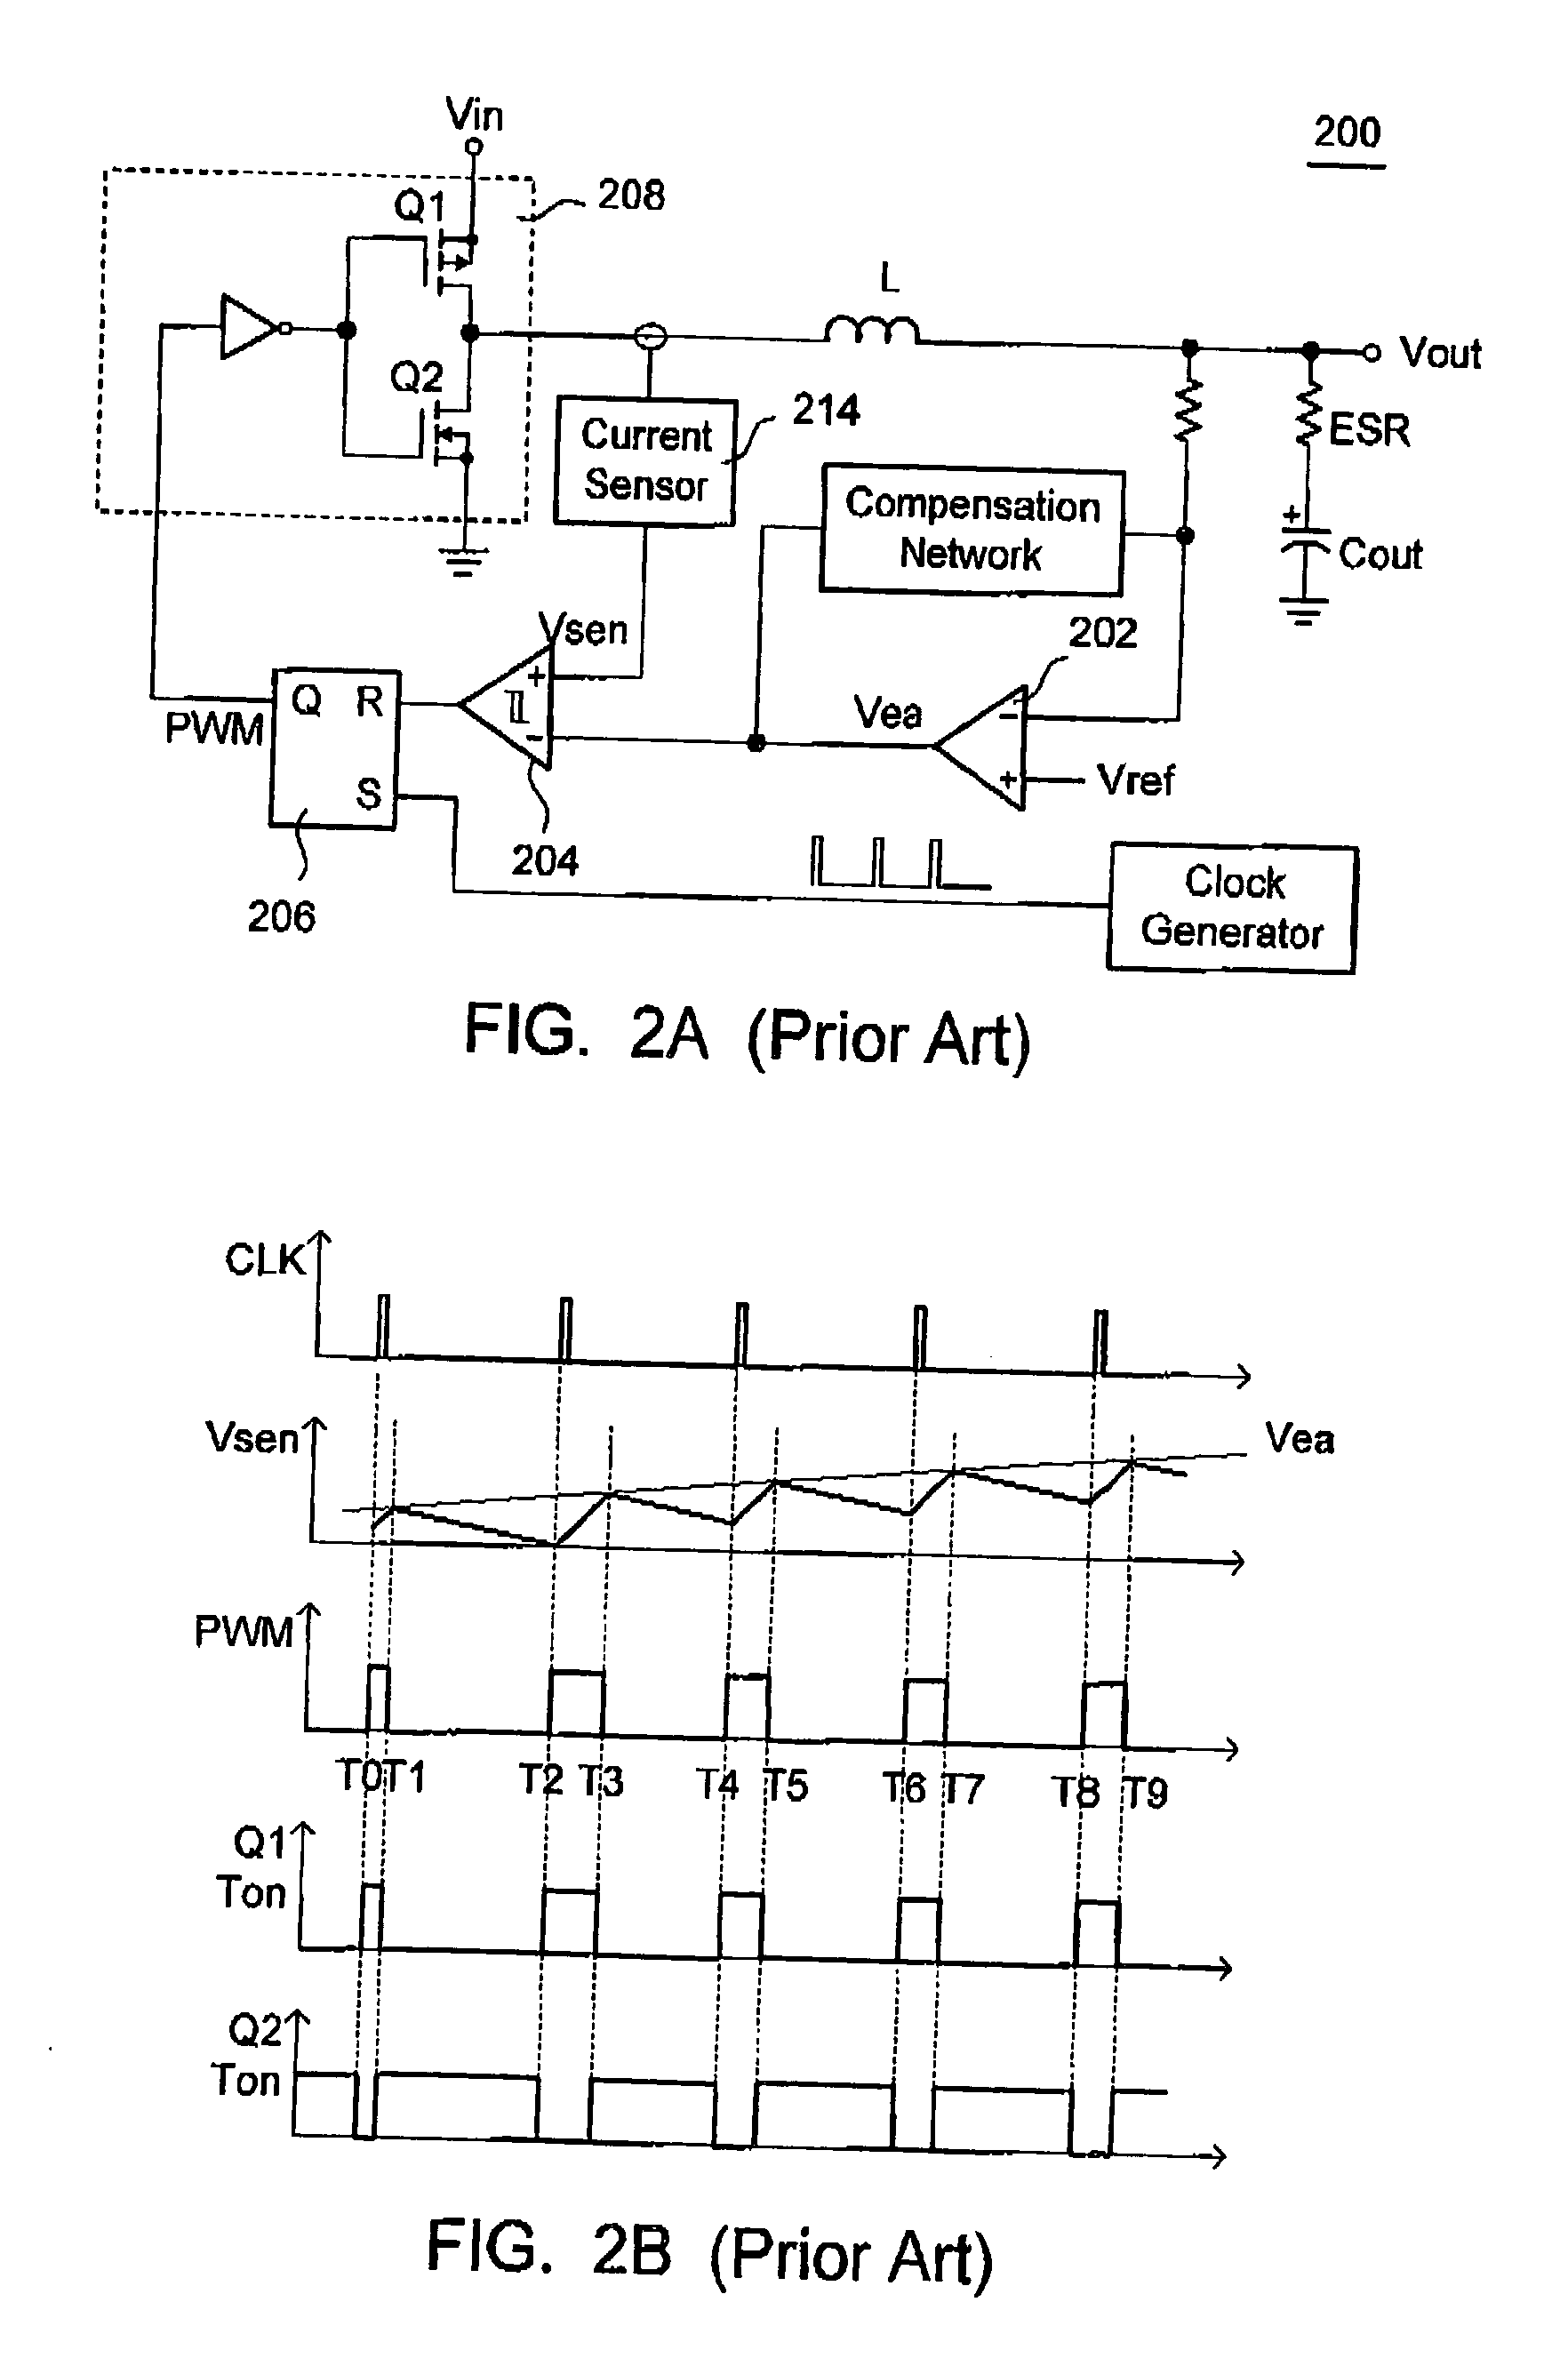 Direct mode pulse width modulation for DC to DC converters